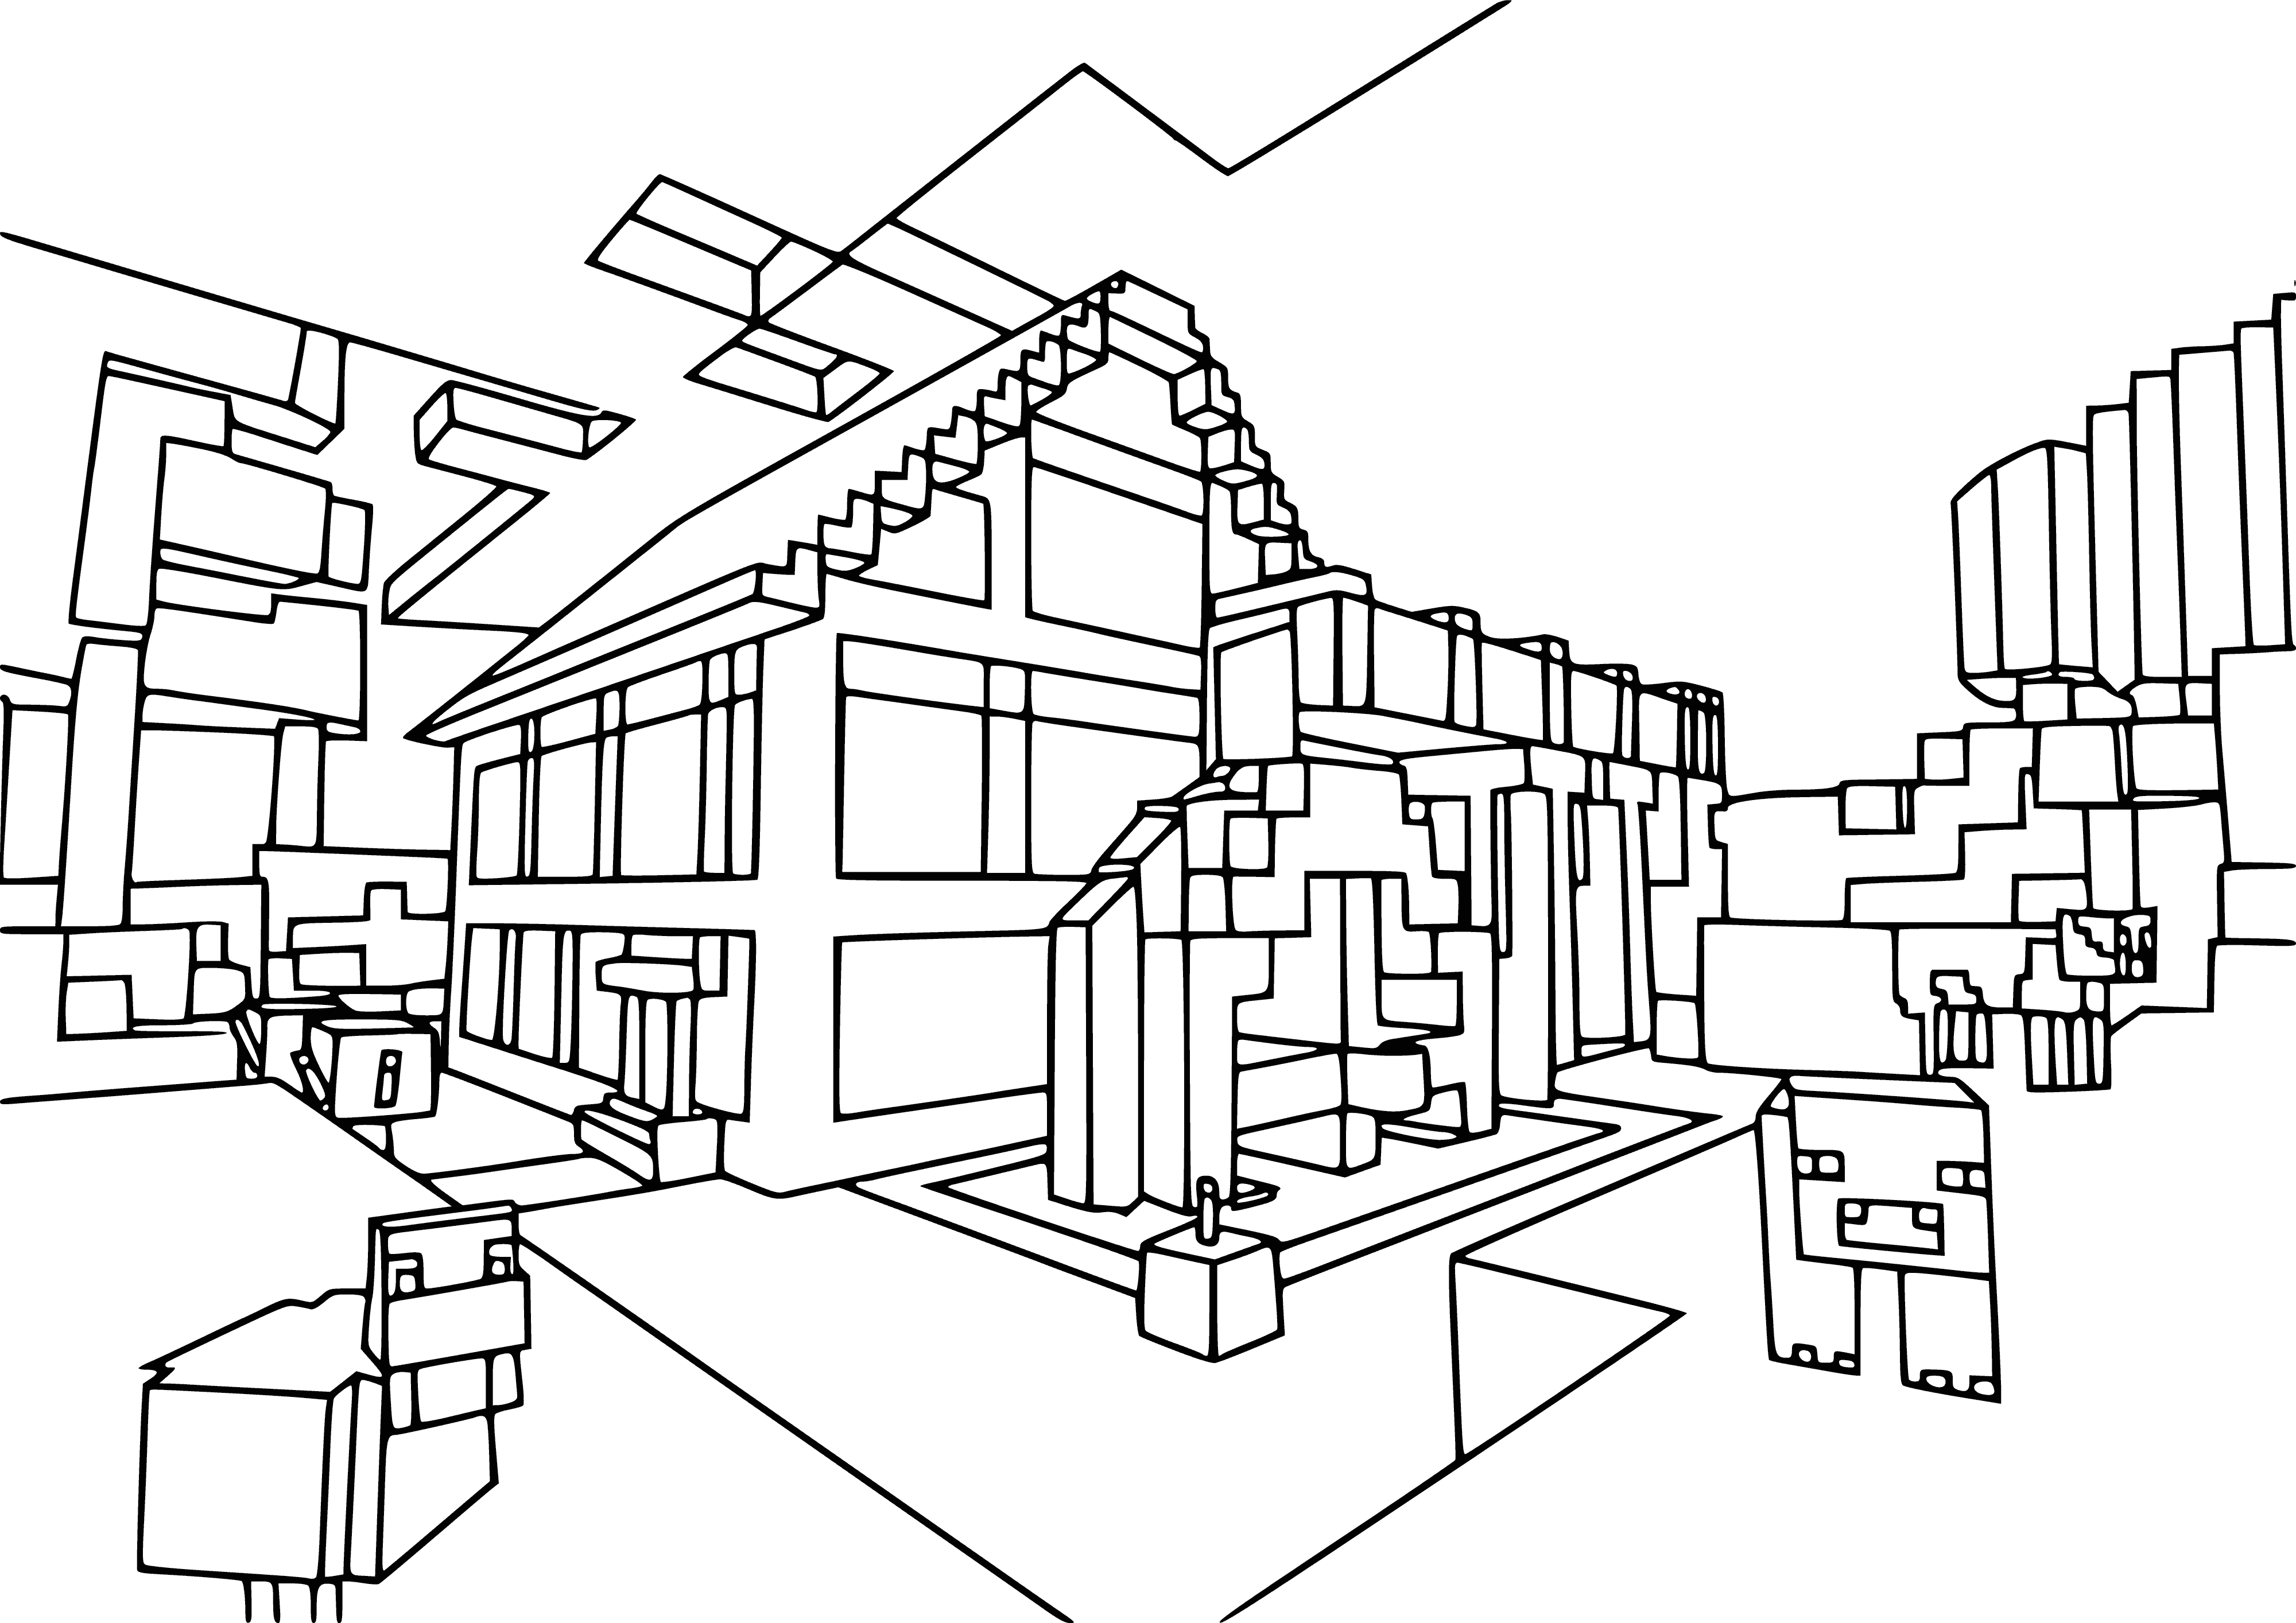 coloring page: A small village with a large house, many windows and a chimney on the roof.